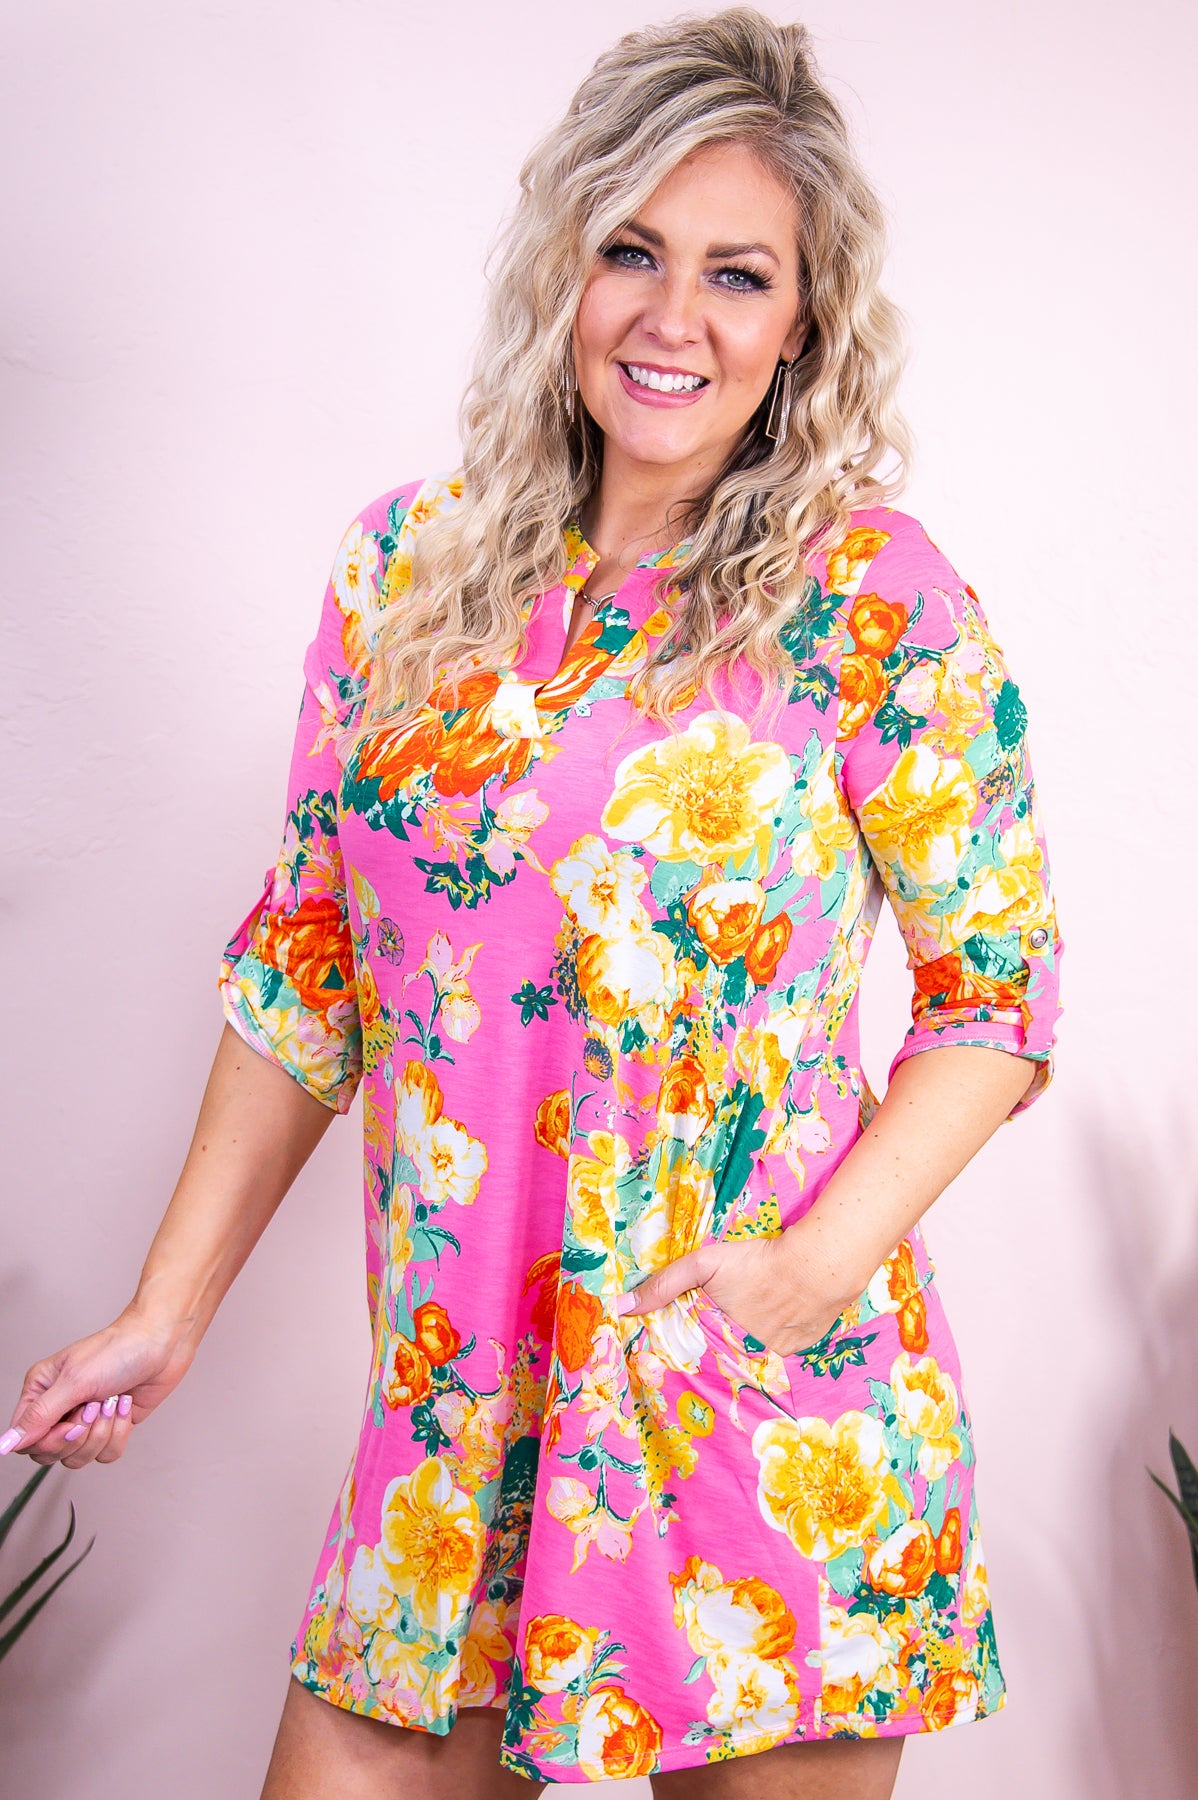 Hot Girl Approved Hot Pink/Yellow Floral Dress - D5255HPK